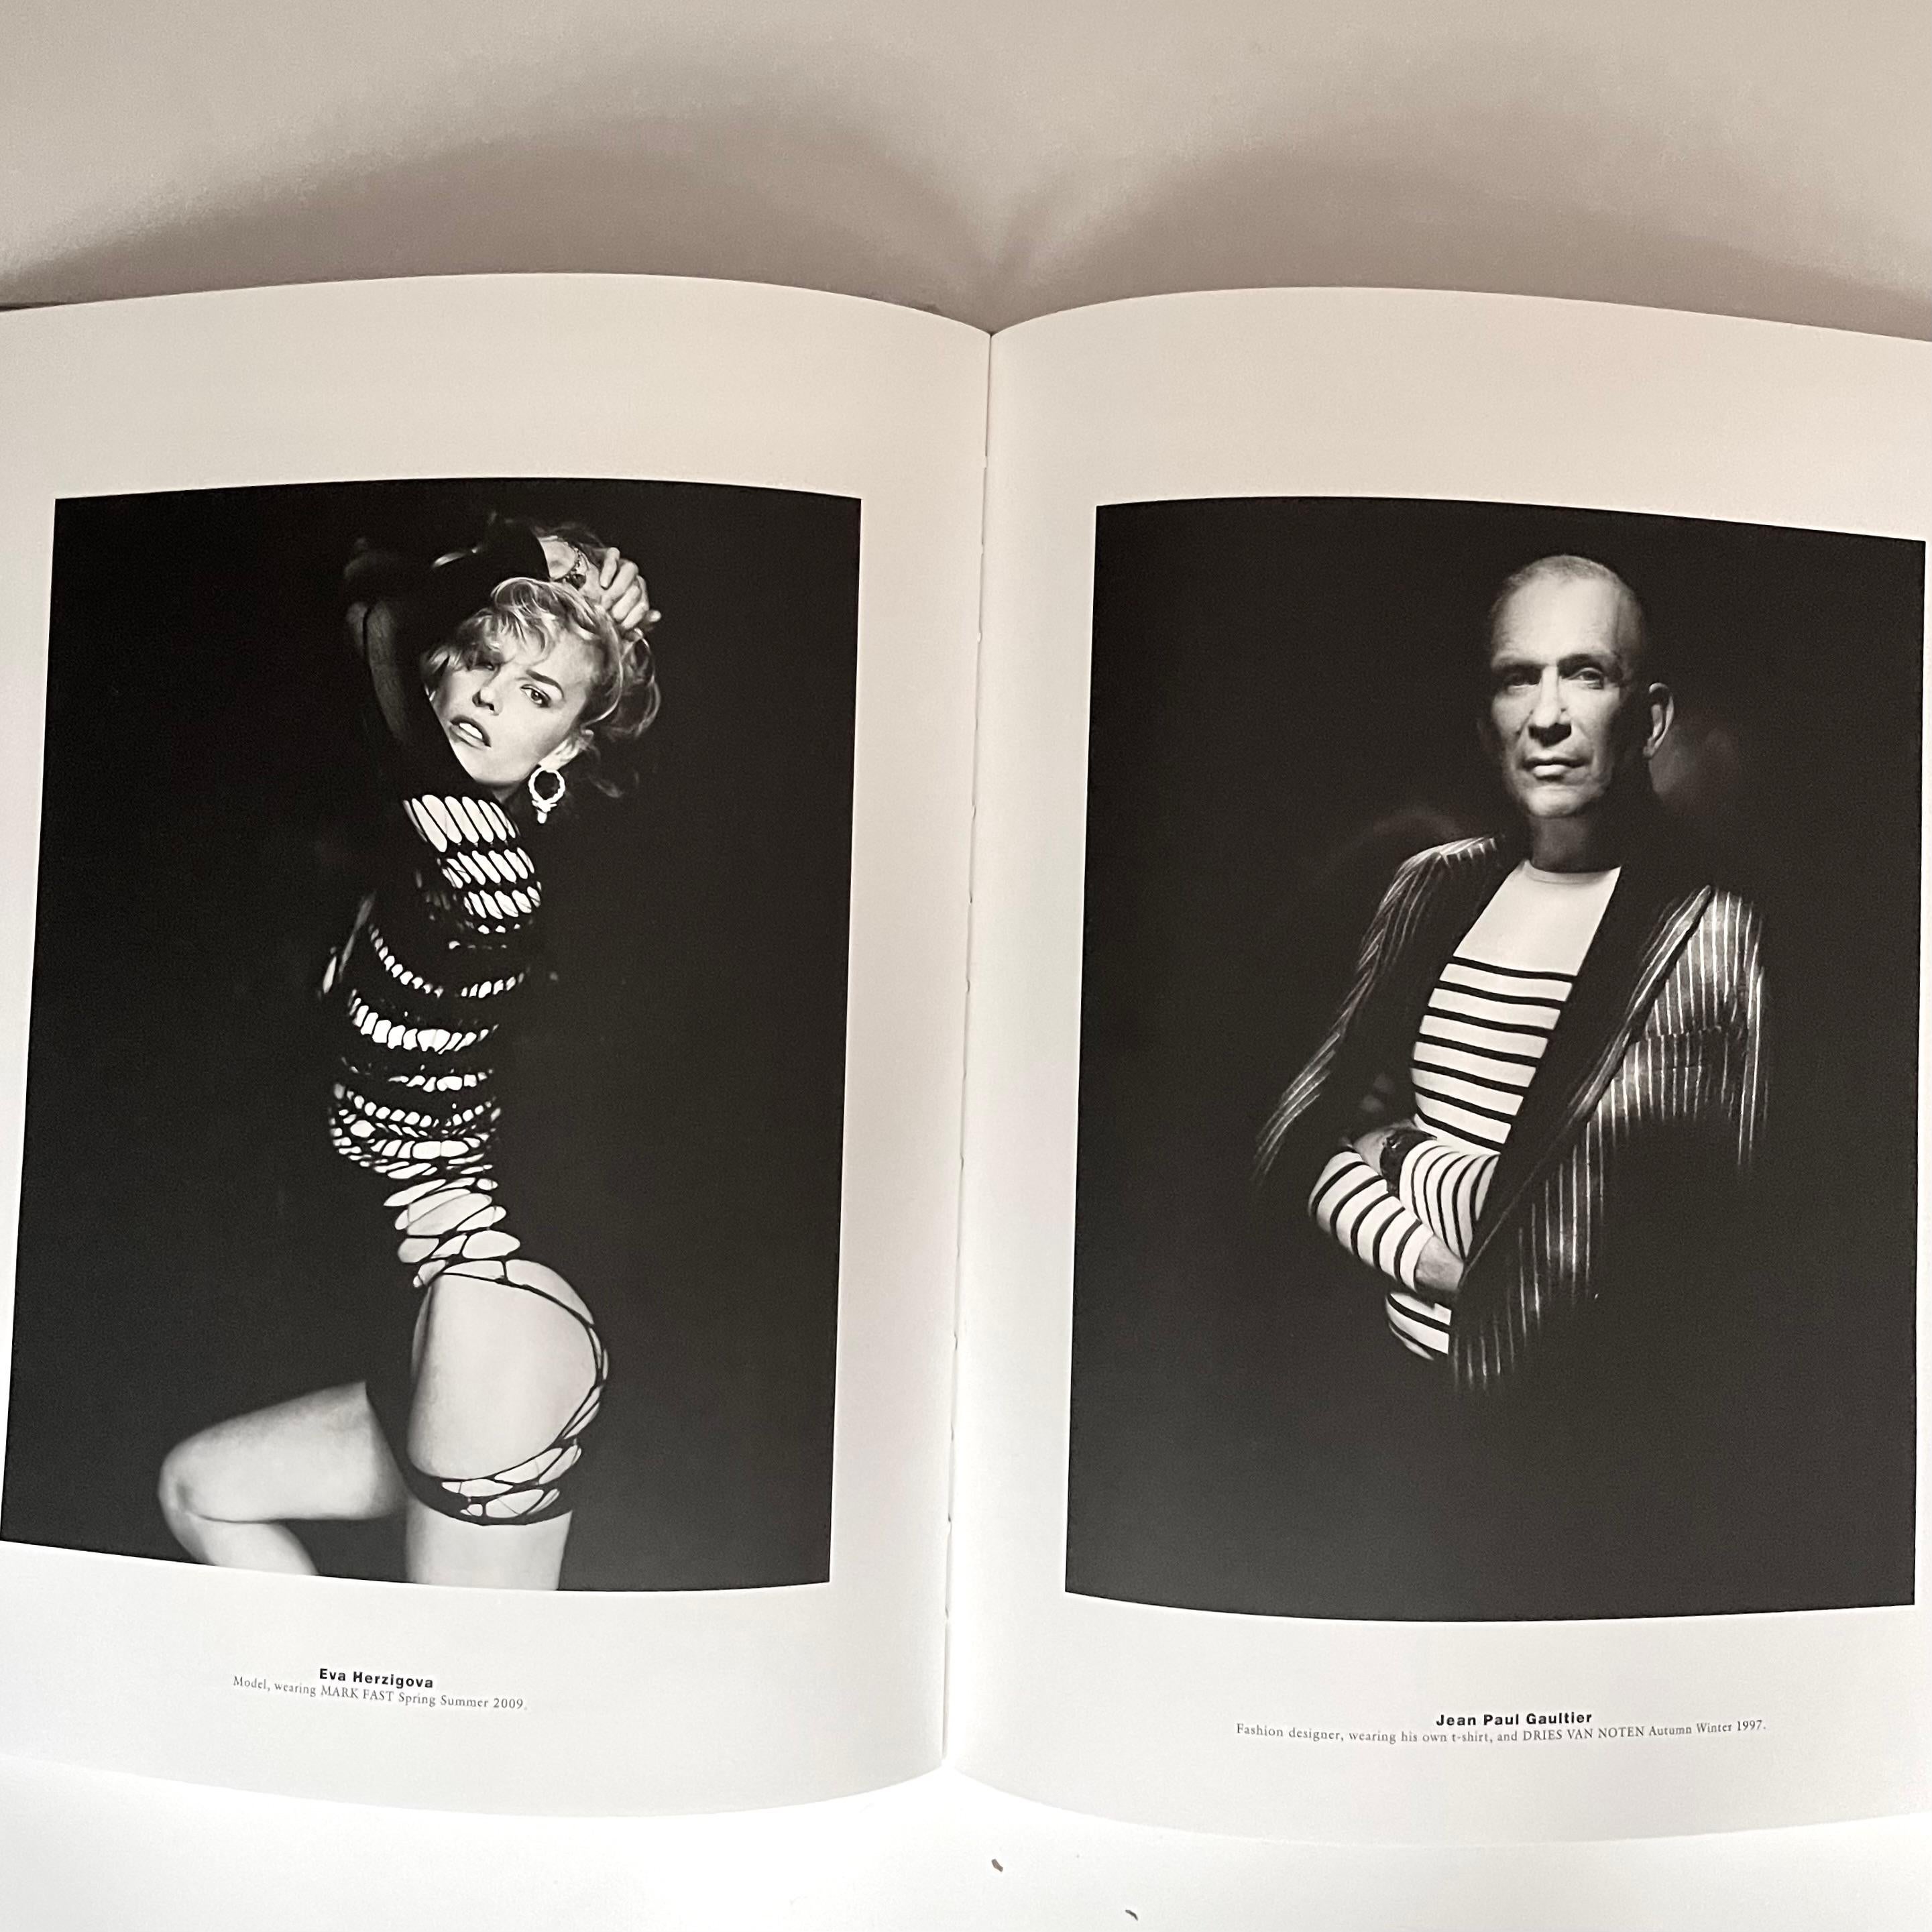 Published by Browns Ltd, 1st edition, London, 2010. Hardback with English text.

A limited edition of the first ever Browns book with images shot by fashion photographer Paolo Roversi and a foreword by designer Ralph Lauren. This beautiful keepsake